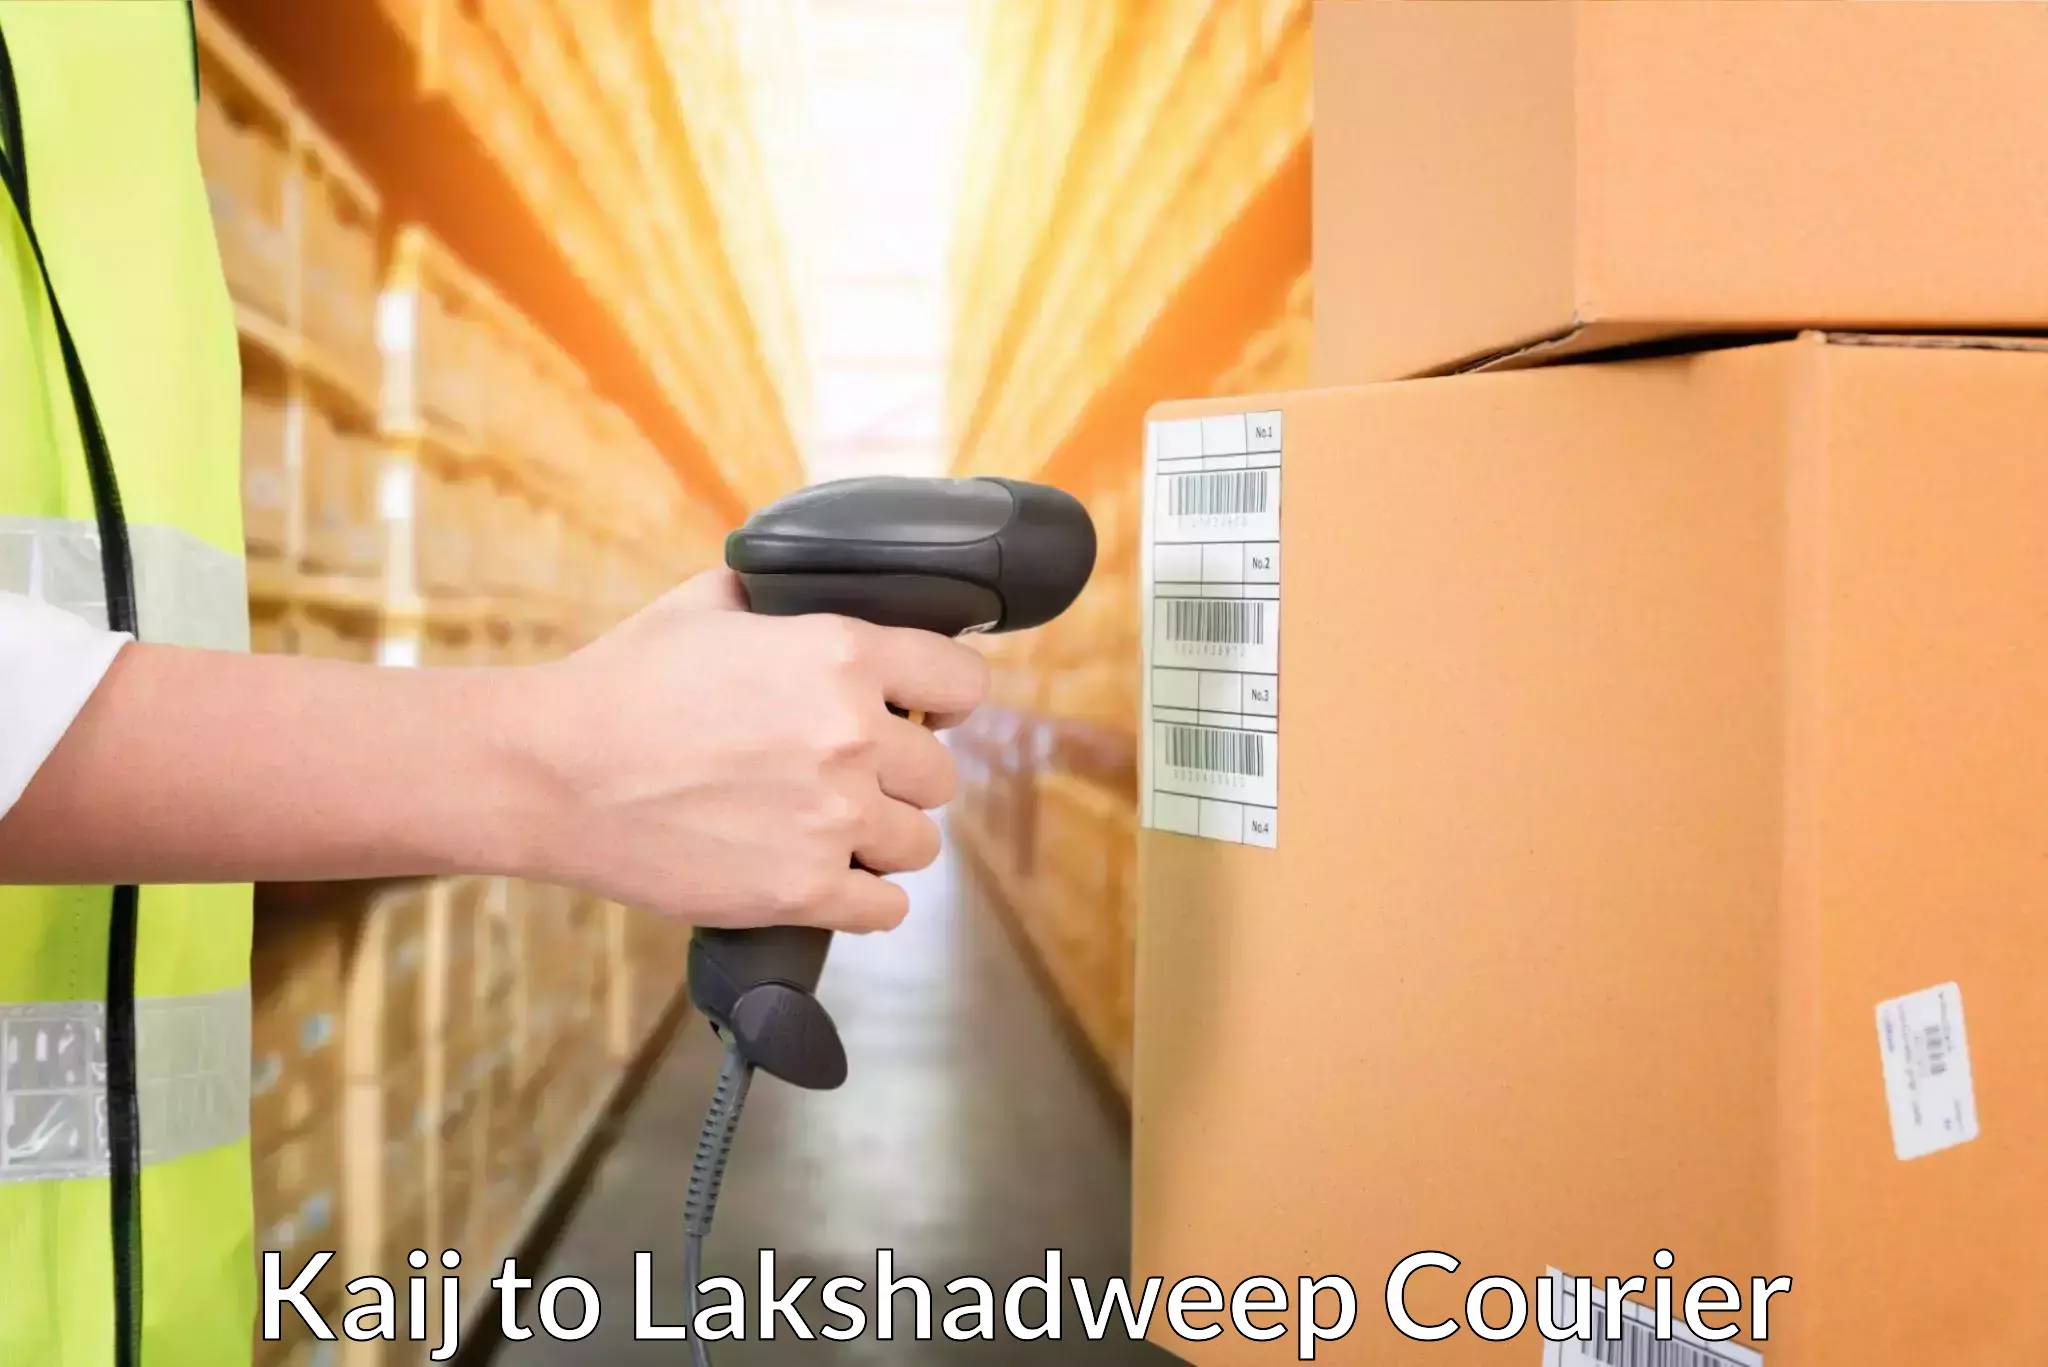 Customer-oriented courier services in Kaij to Lakshadweep